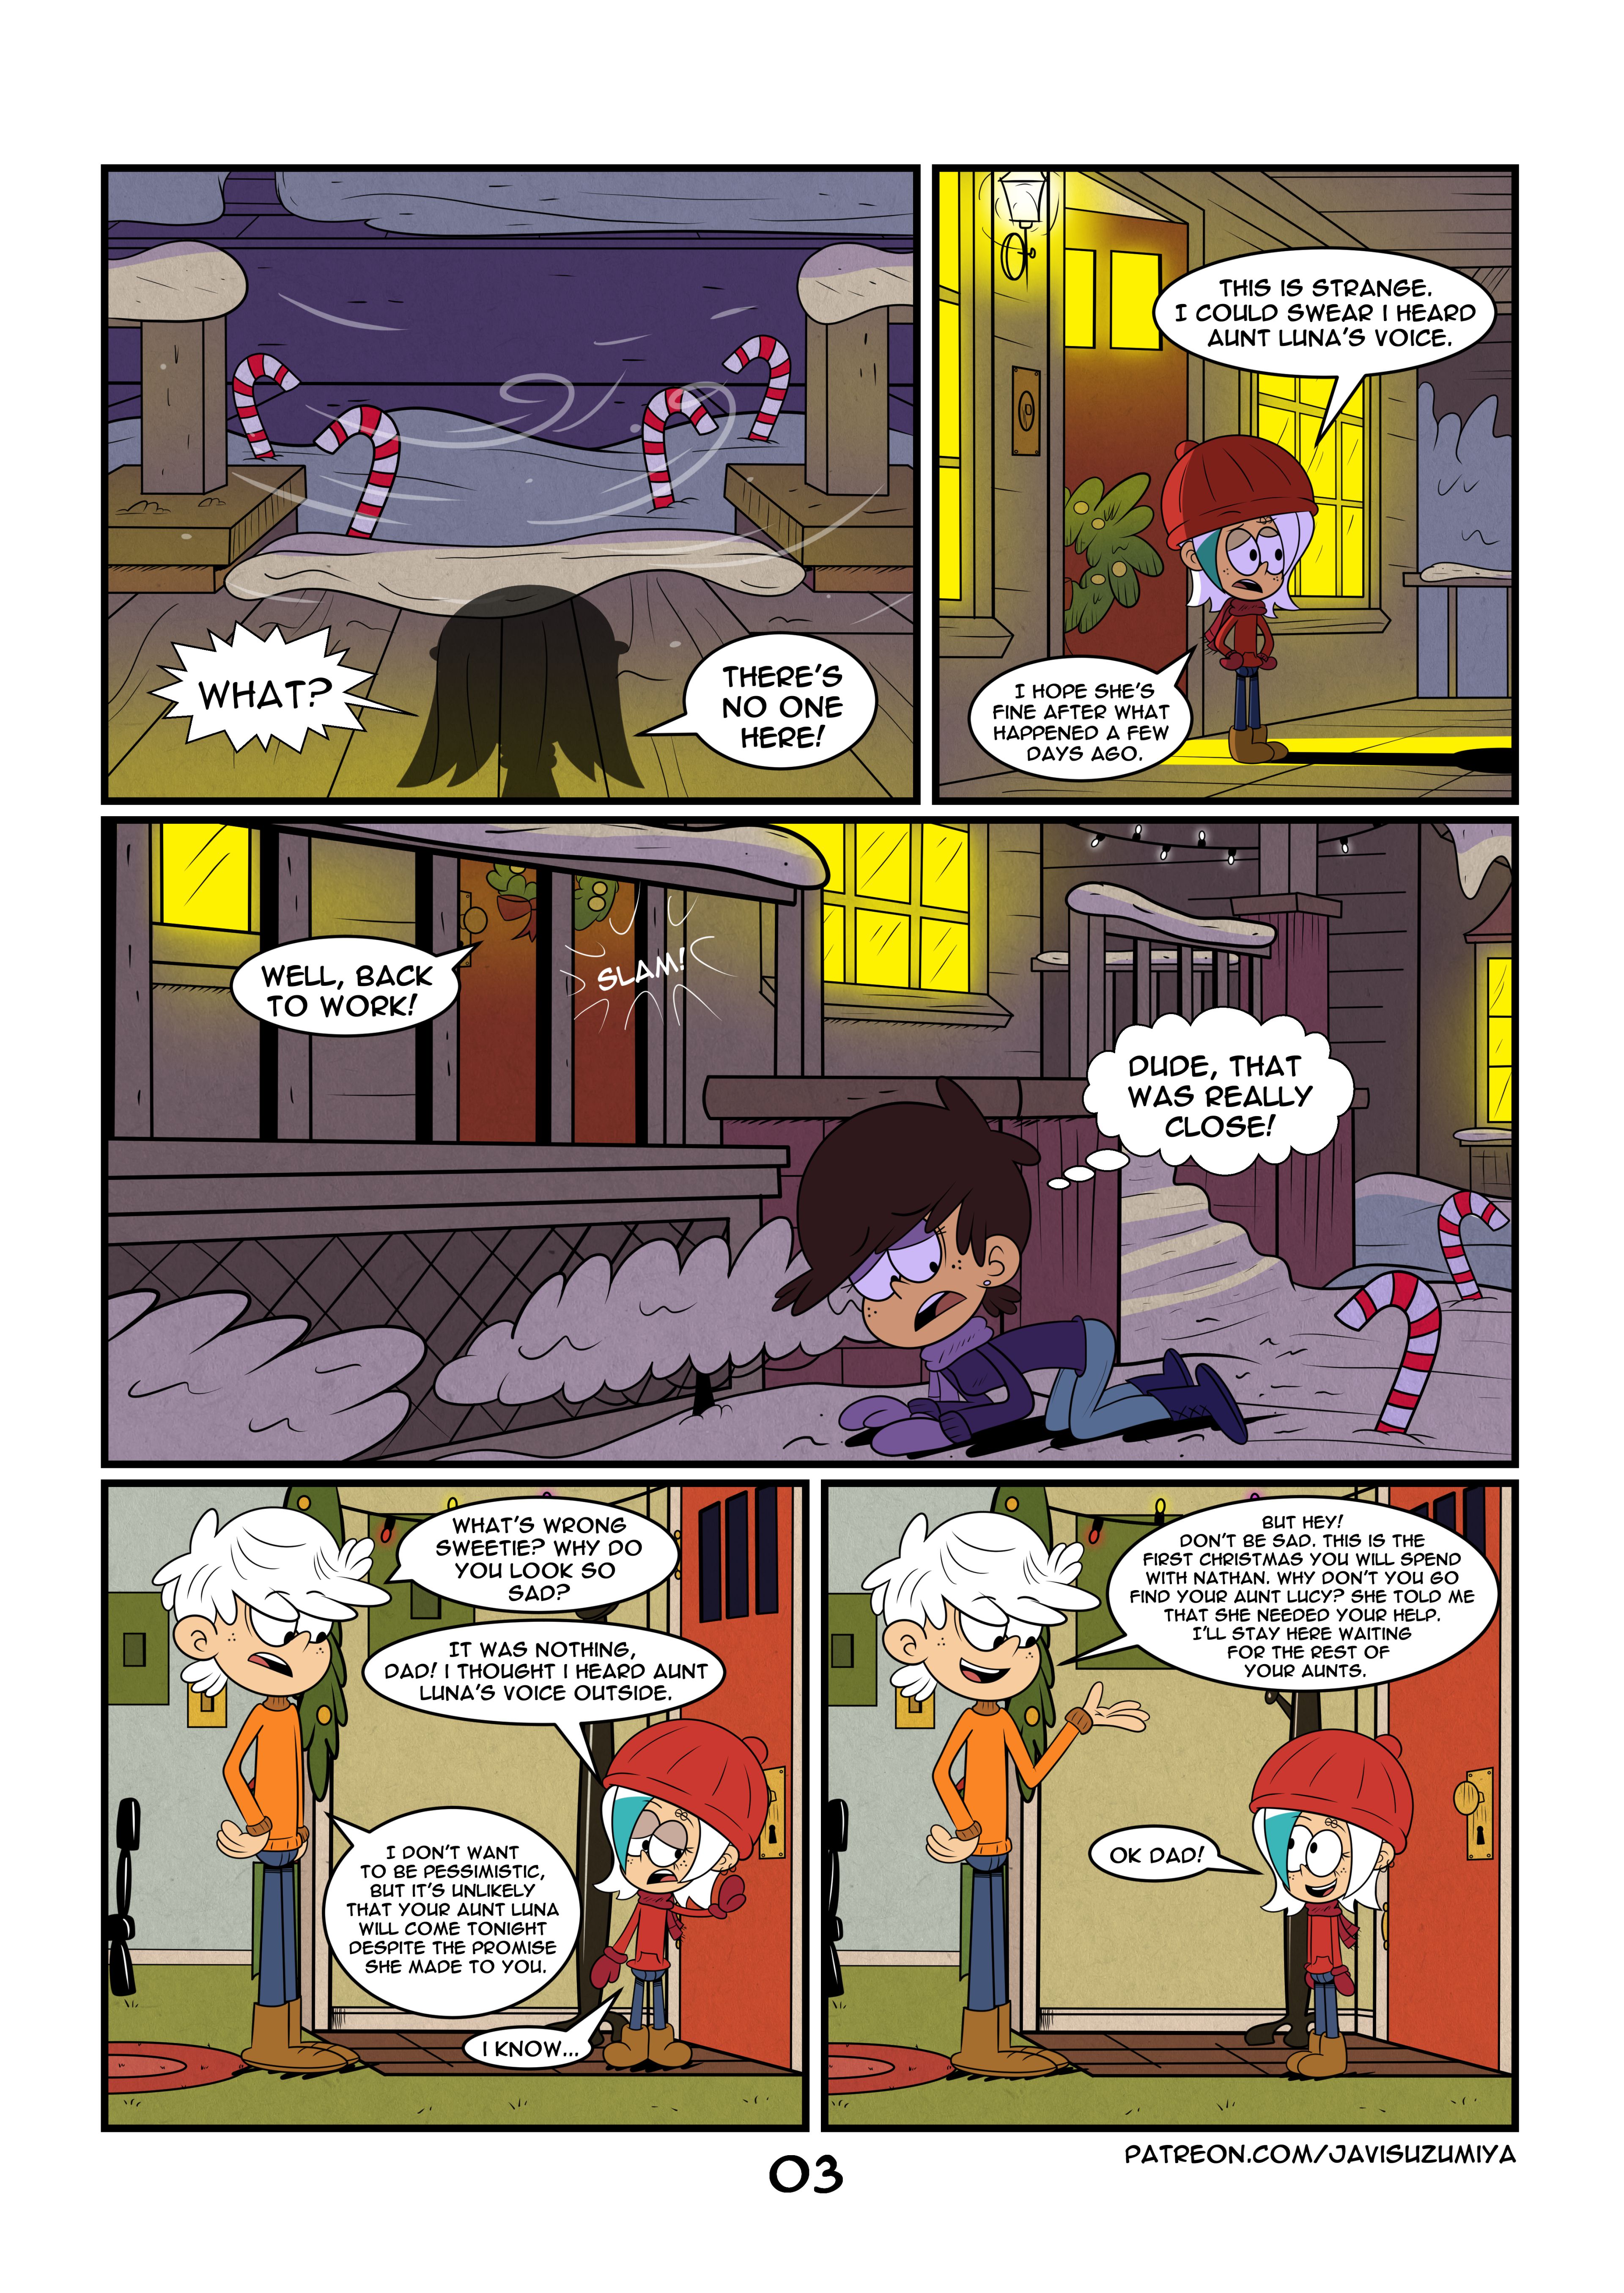 4 Some Porn Loud House - It's (Not) Your Fault (The Loud House) [JaviSuzumiya] - 1 . It's (Not) Your  Fault - Chapter 1 (The Loud House) [JaviSuzumiya] - AllPornComic